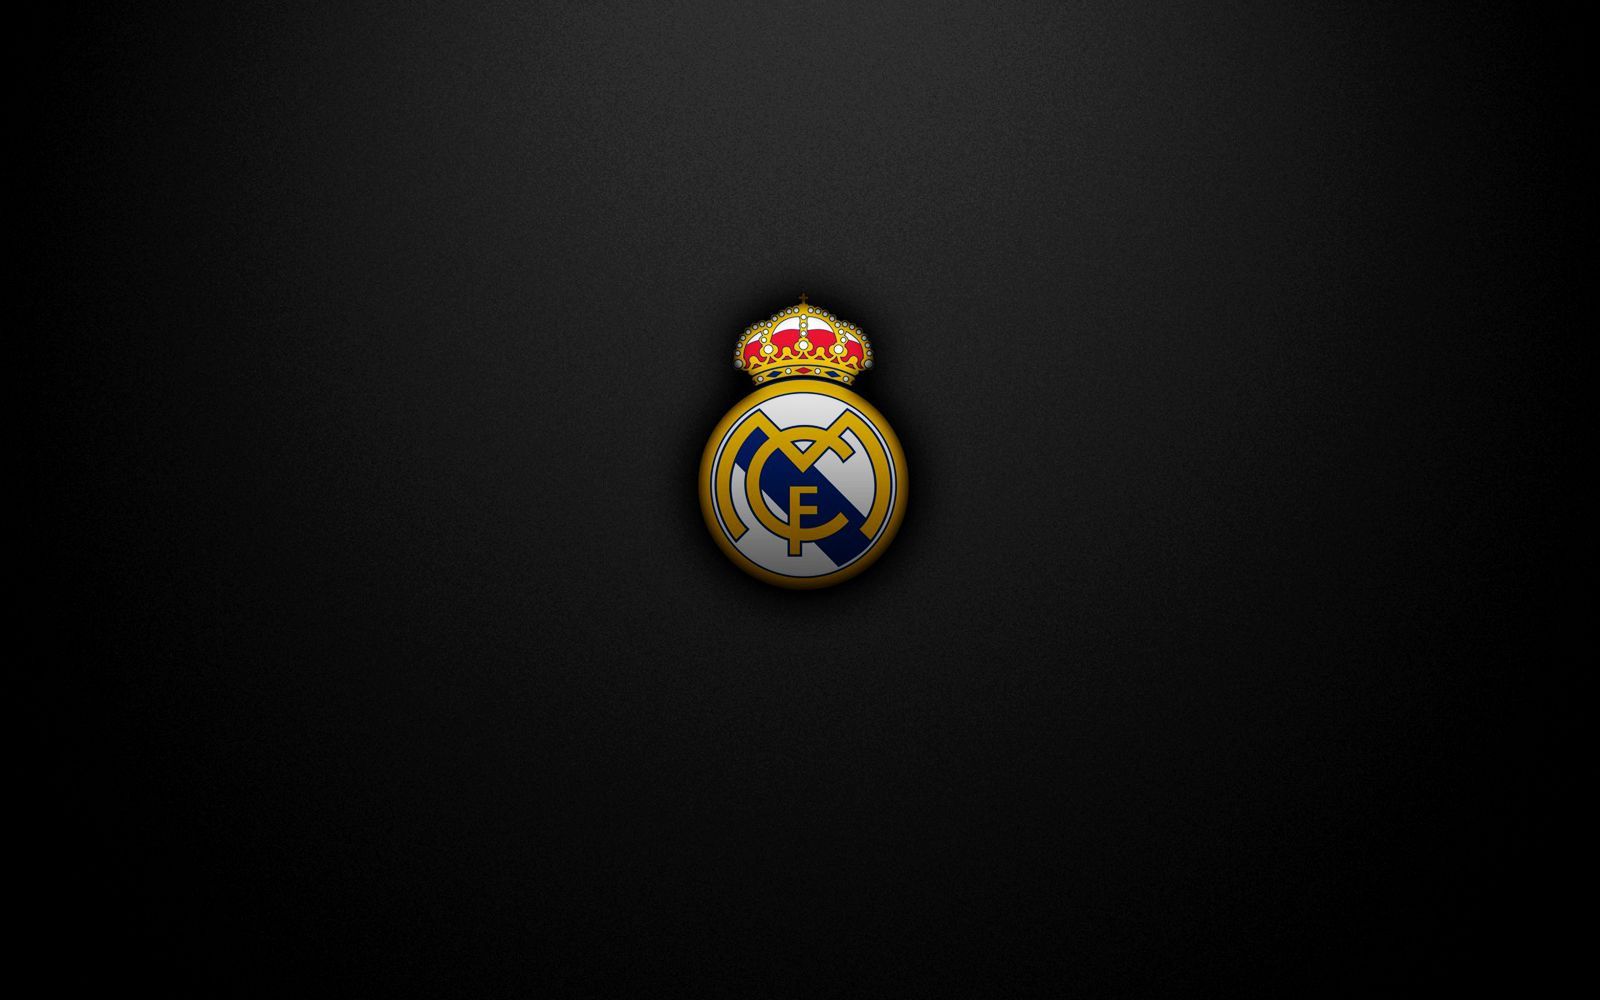 Real madrid black wallpaper hd Wallpapers, Backgrounds, Images